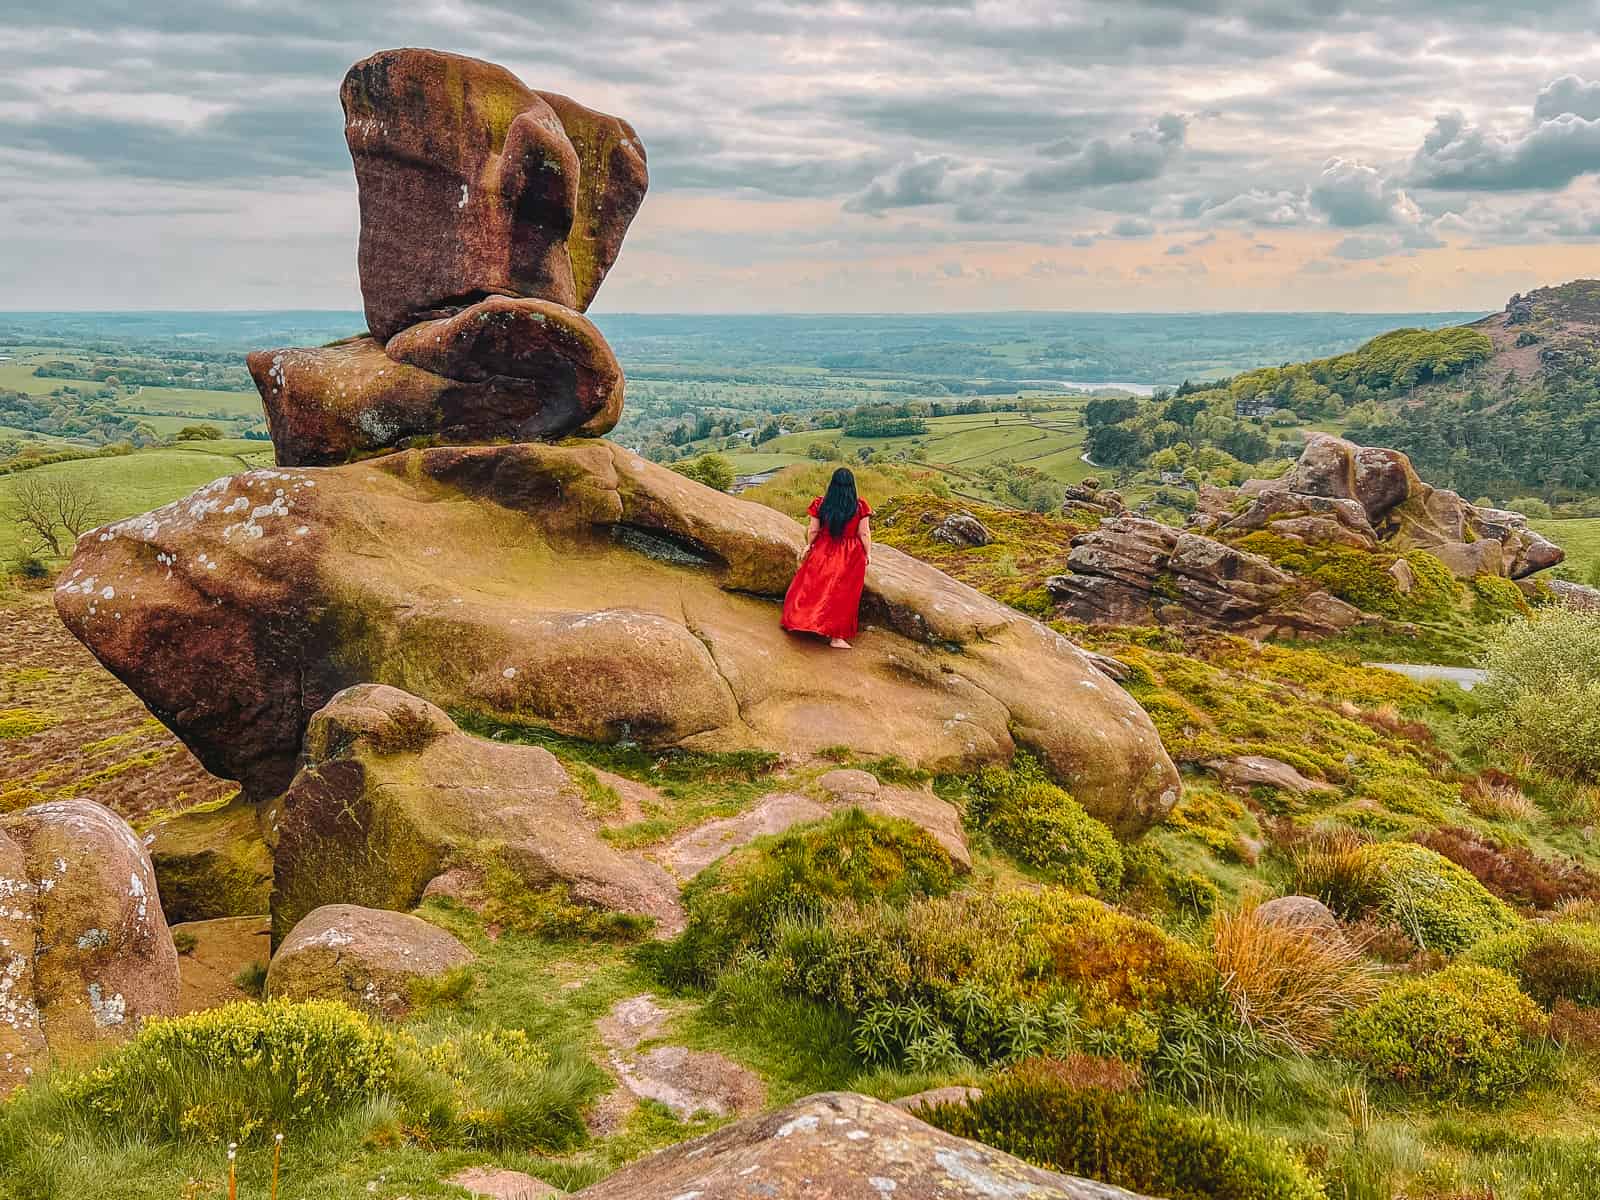 How to visit Ramshaw Rocks Pride and Prejudice Filming location